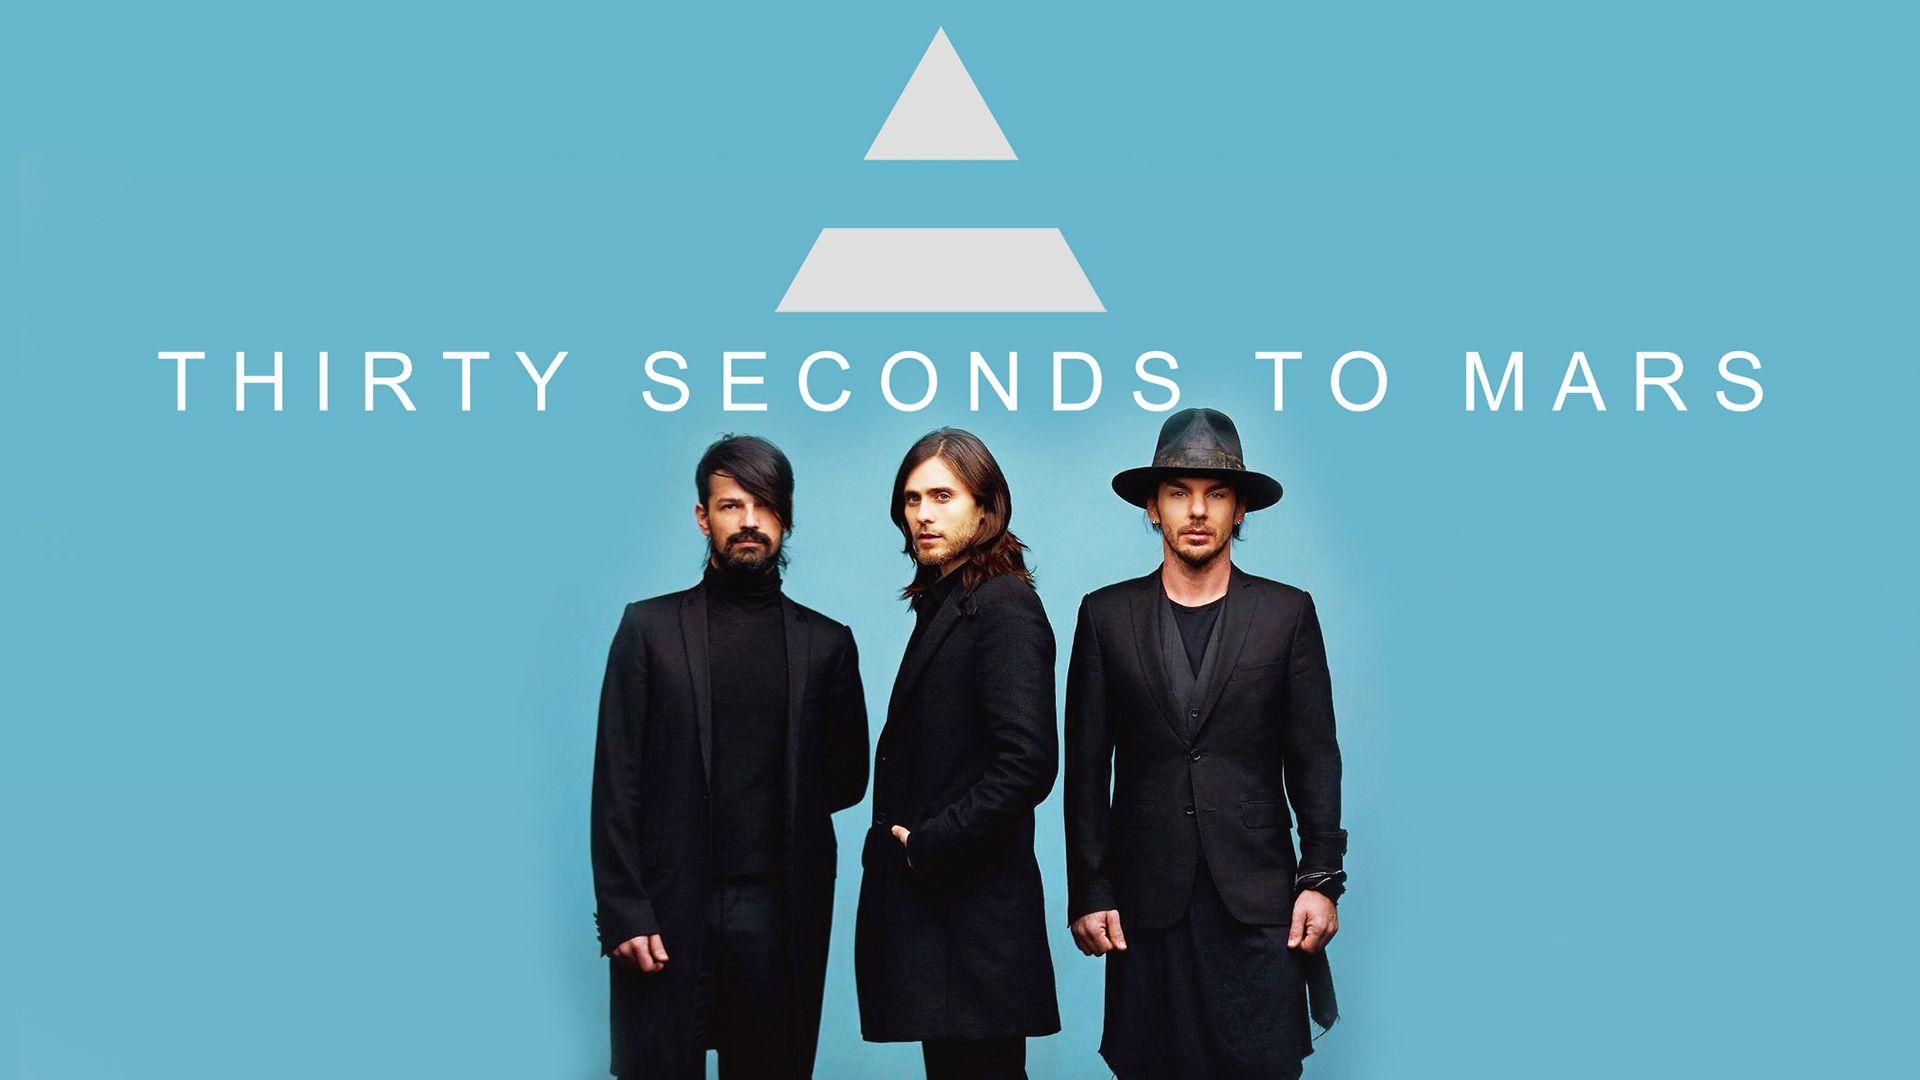 Seconds to Mars